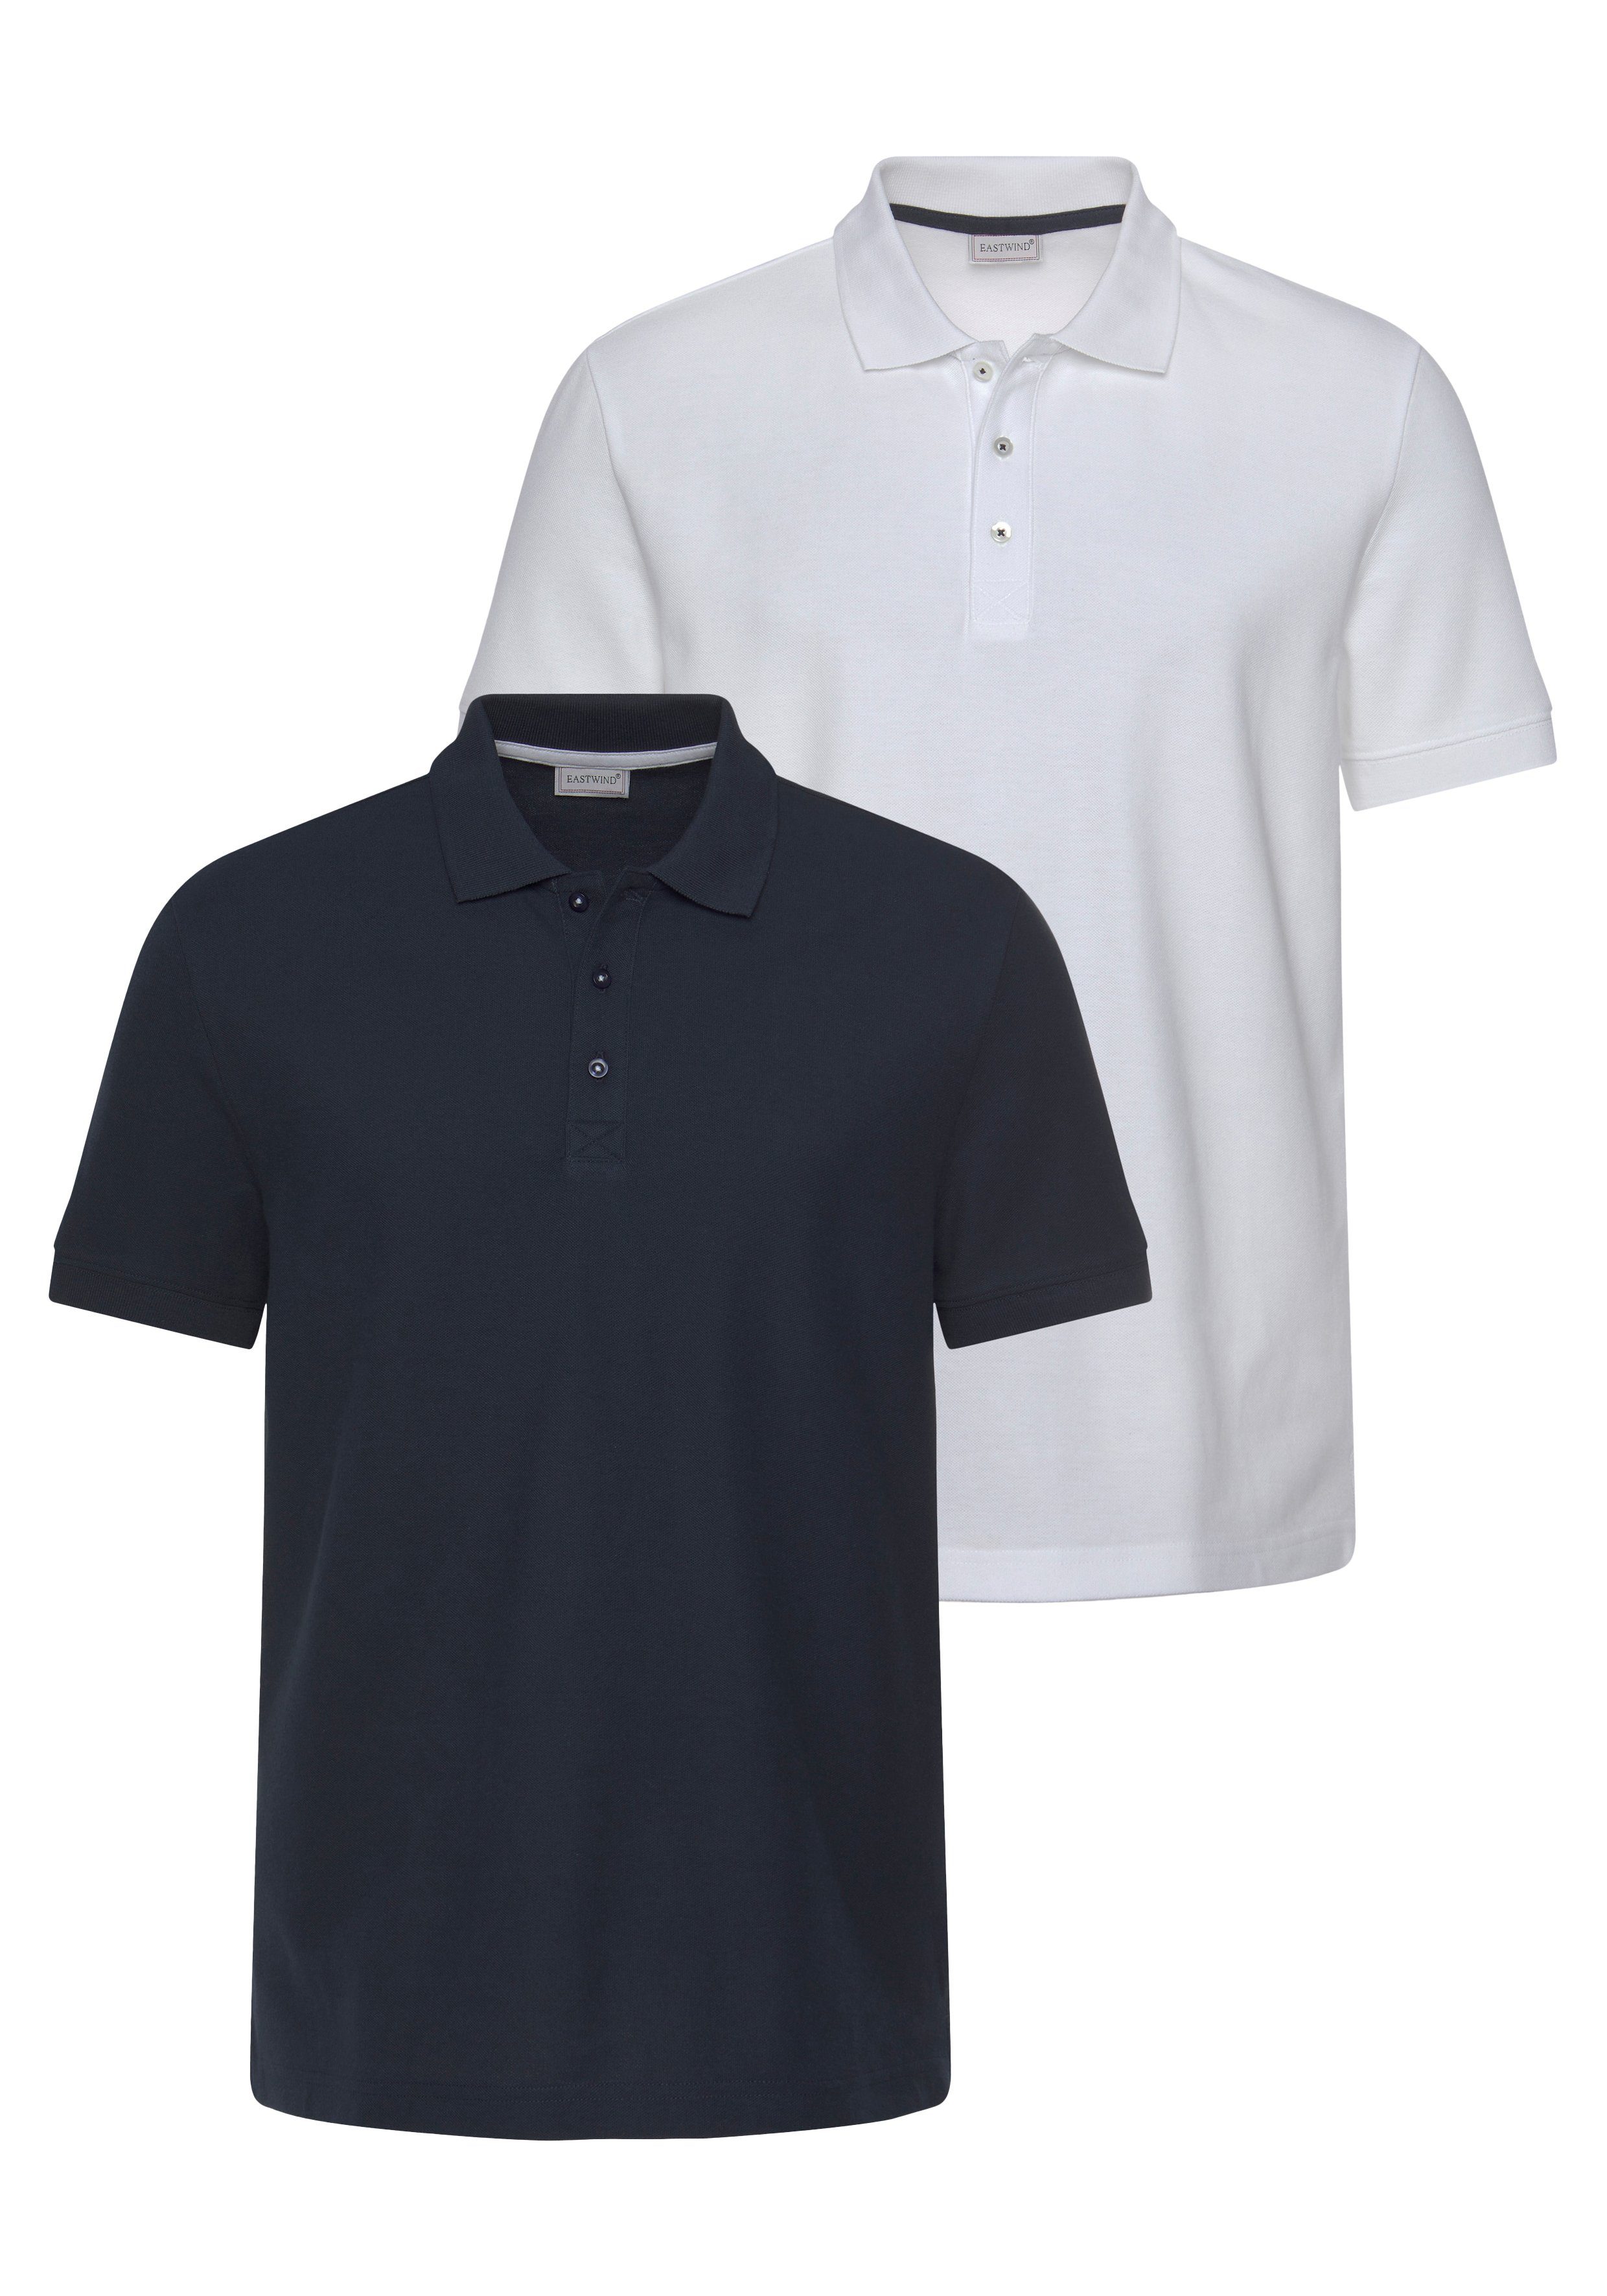 Eastwind Poloshirt marine-weiß Double Pack Polo, navy+white (2er-Pack)